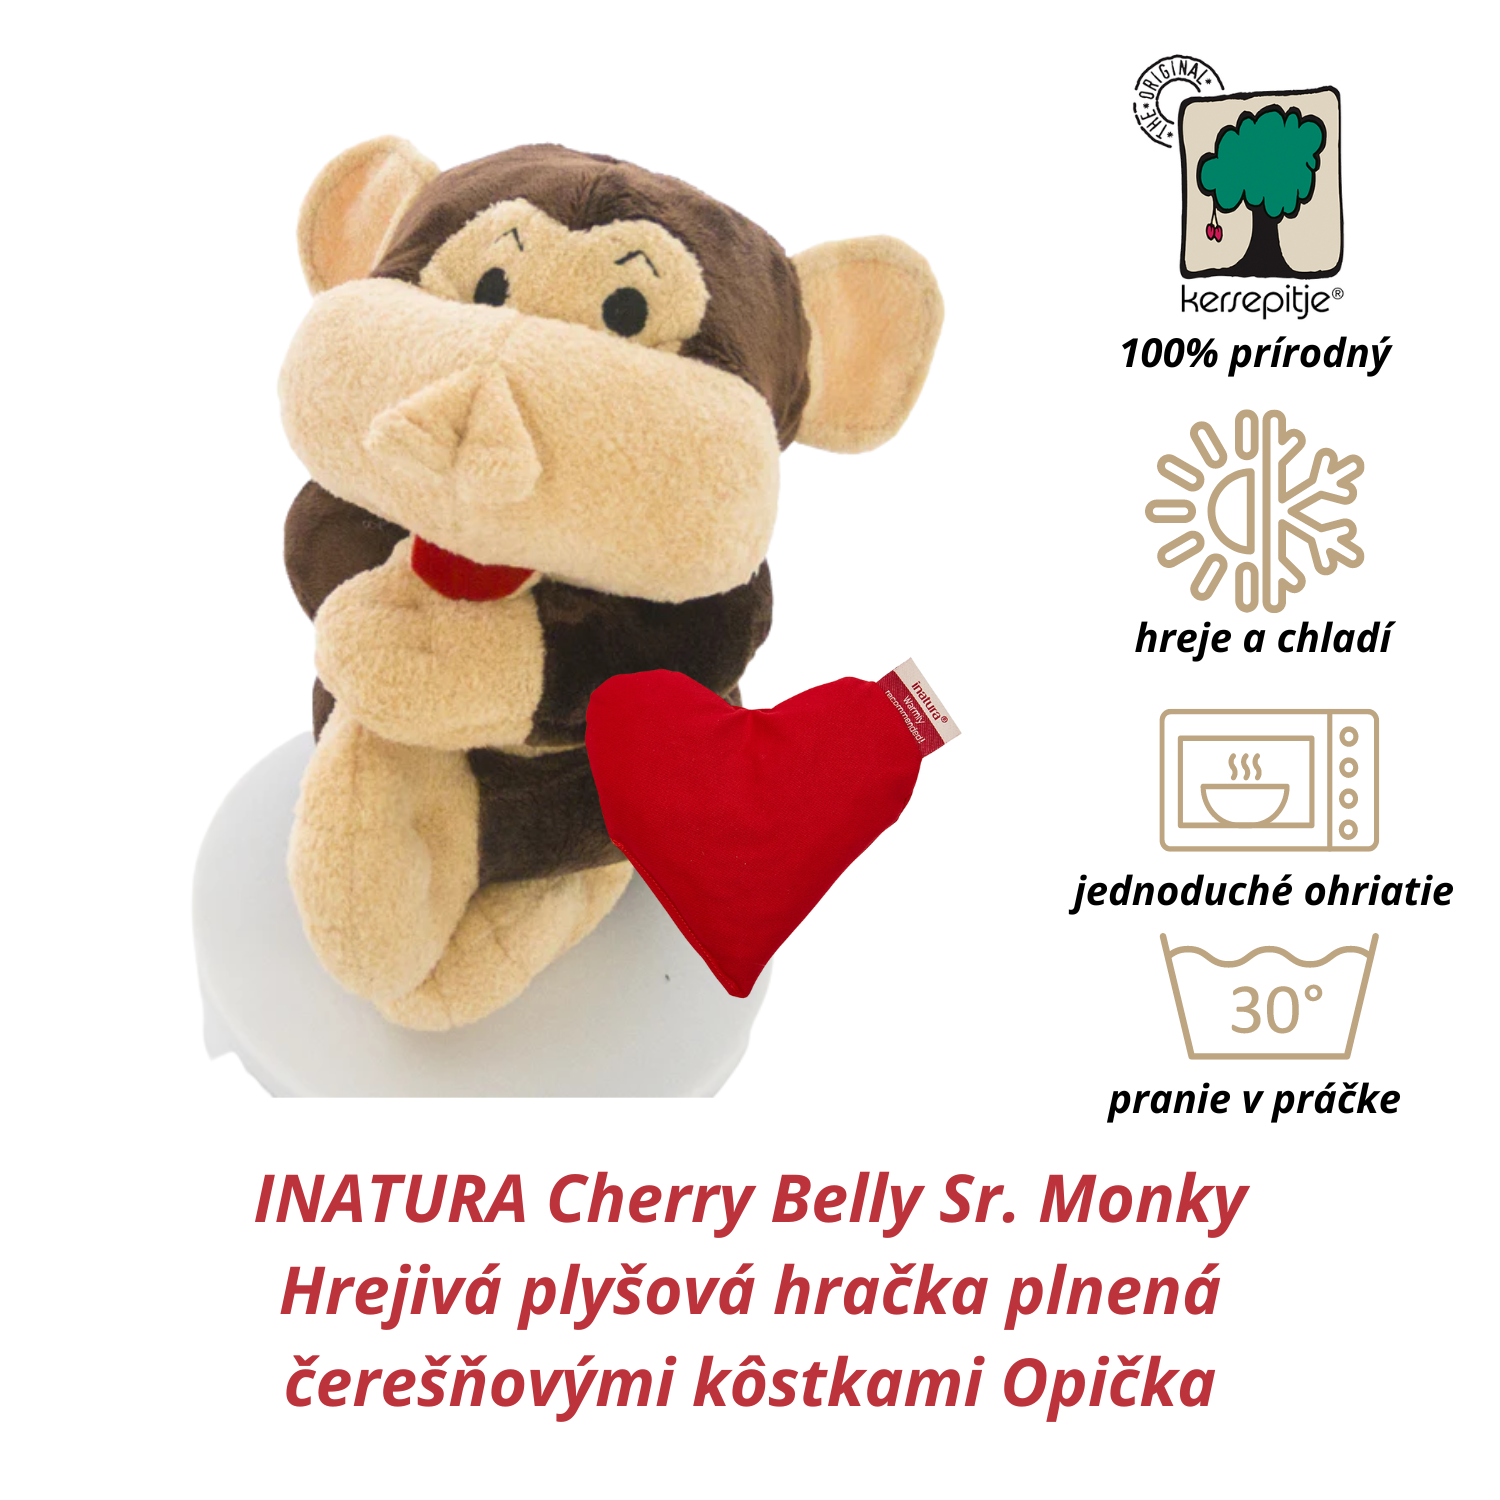 INATURA Cherry Belly Sr. Monky